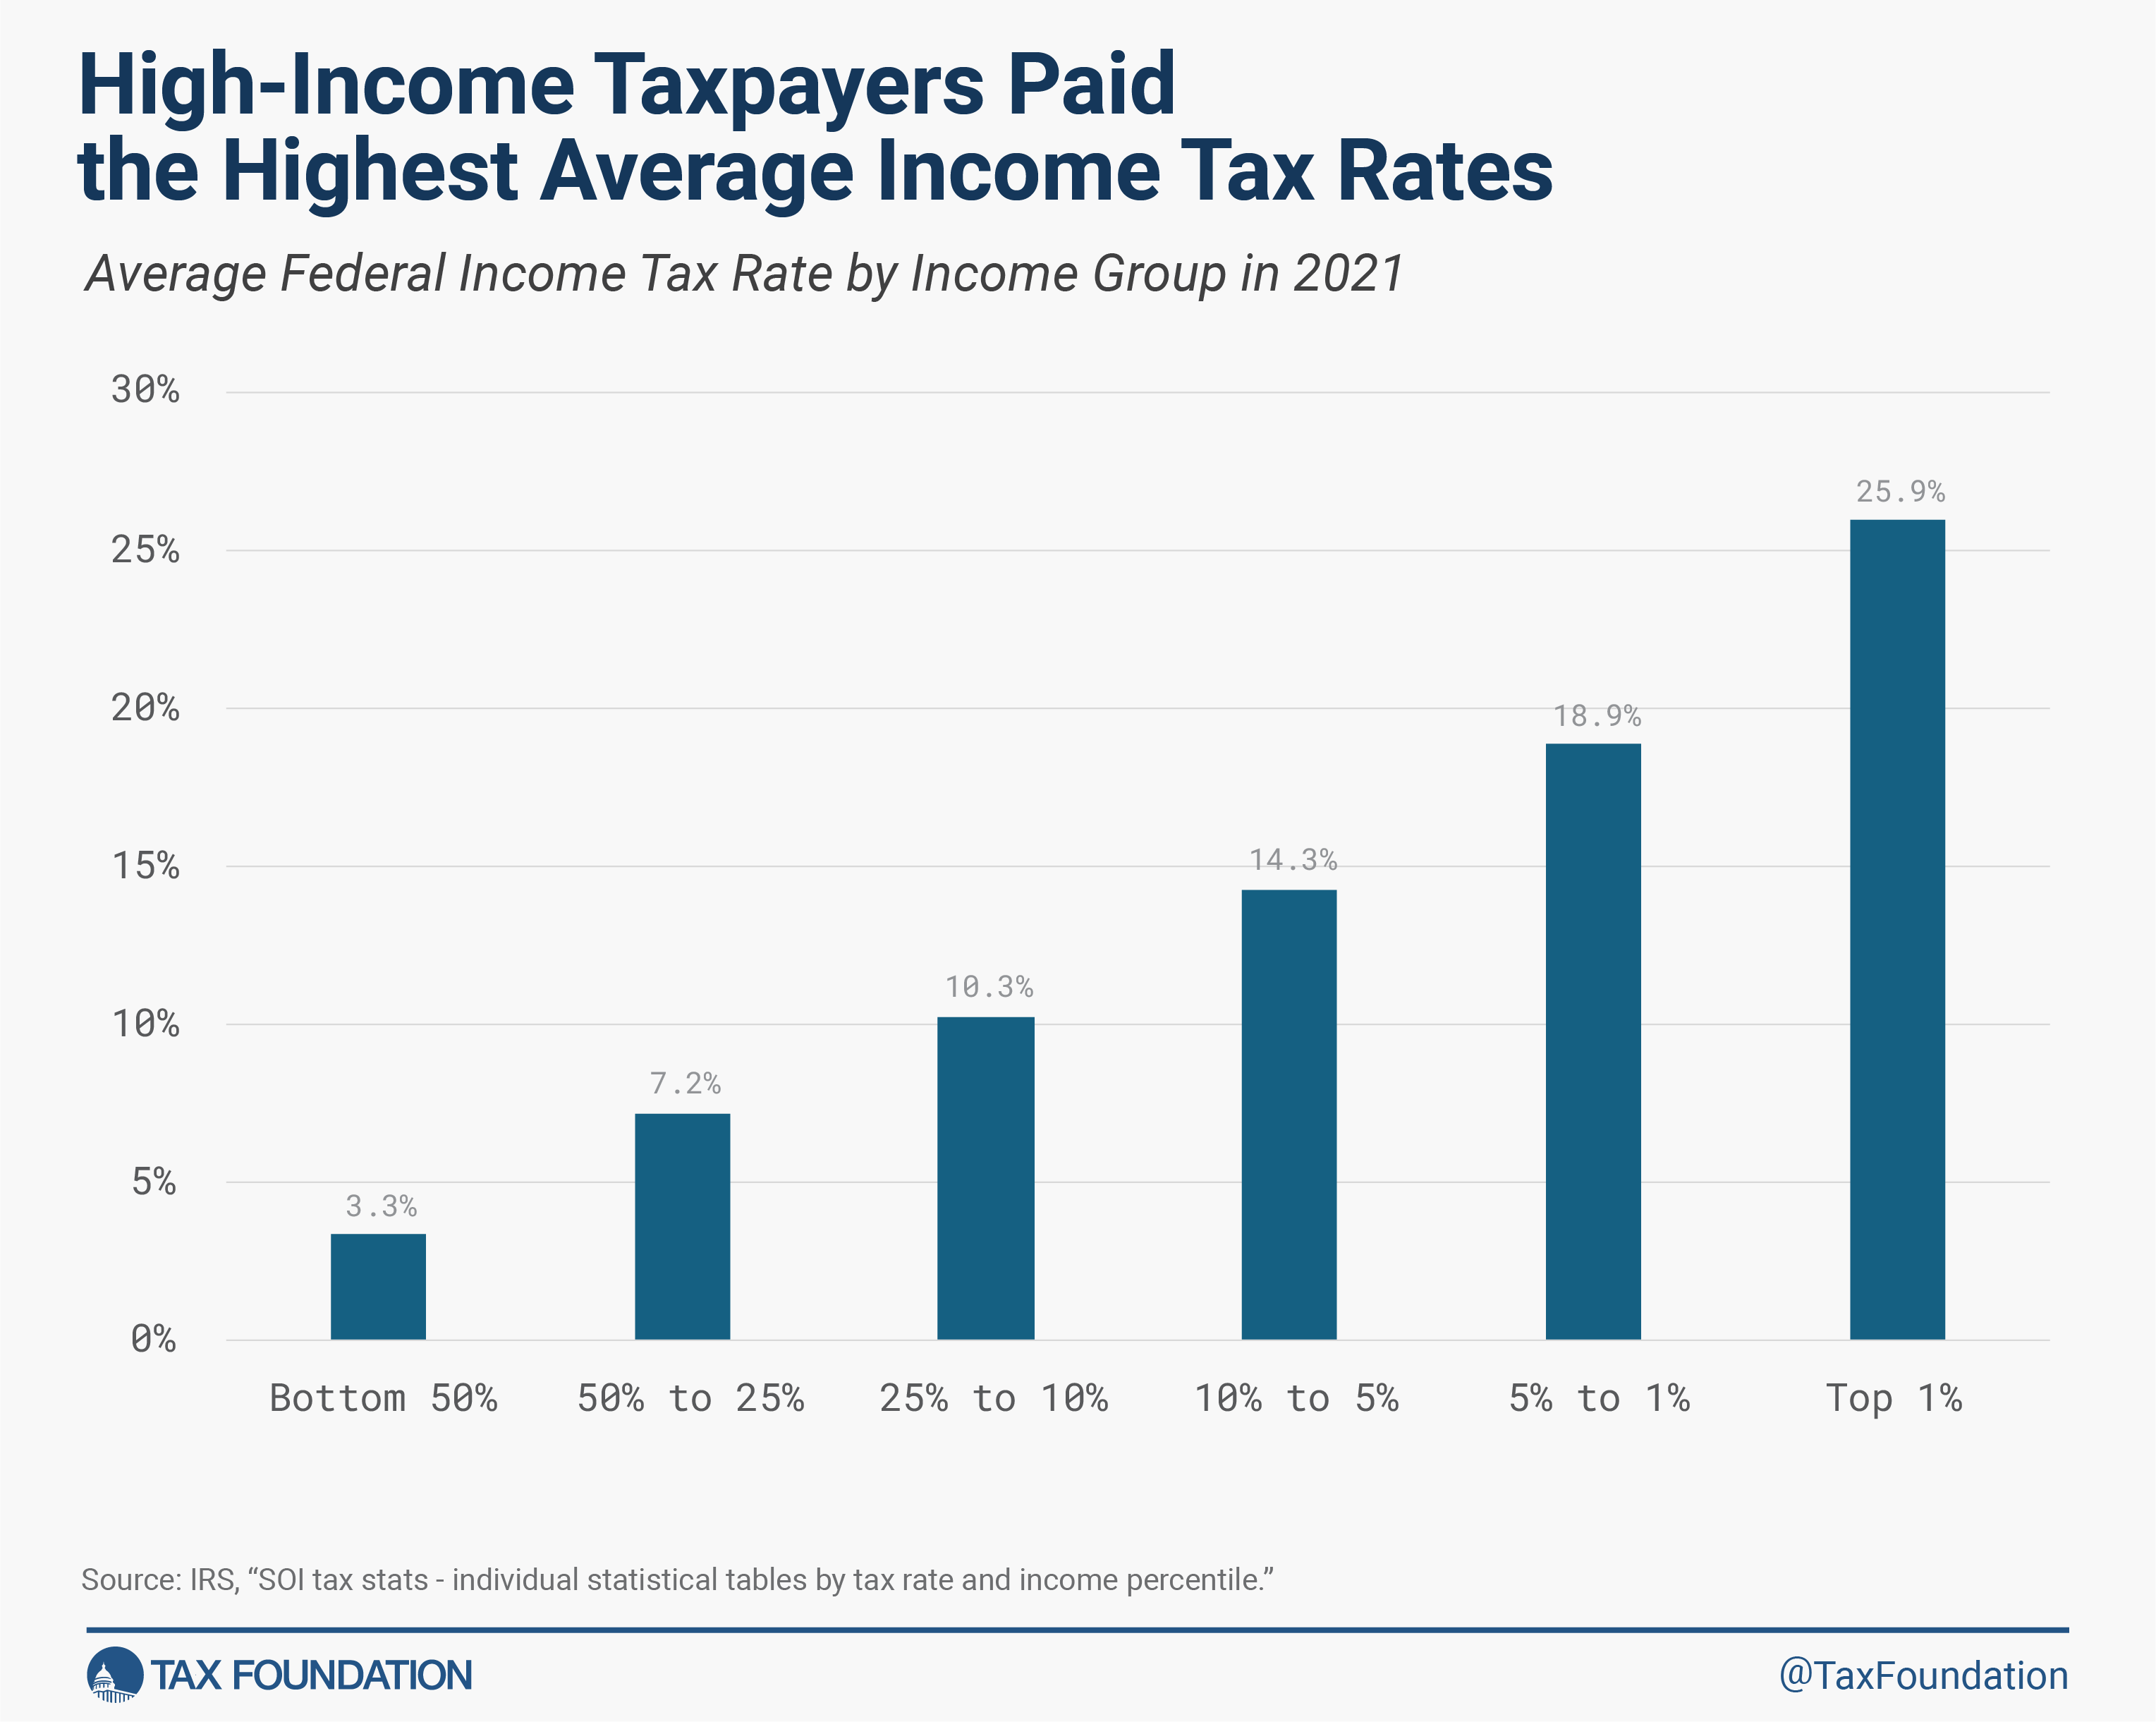 High income earners pay the highest average income tax rates according to latest federal income tax data